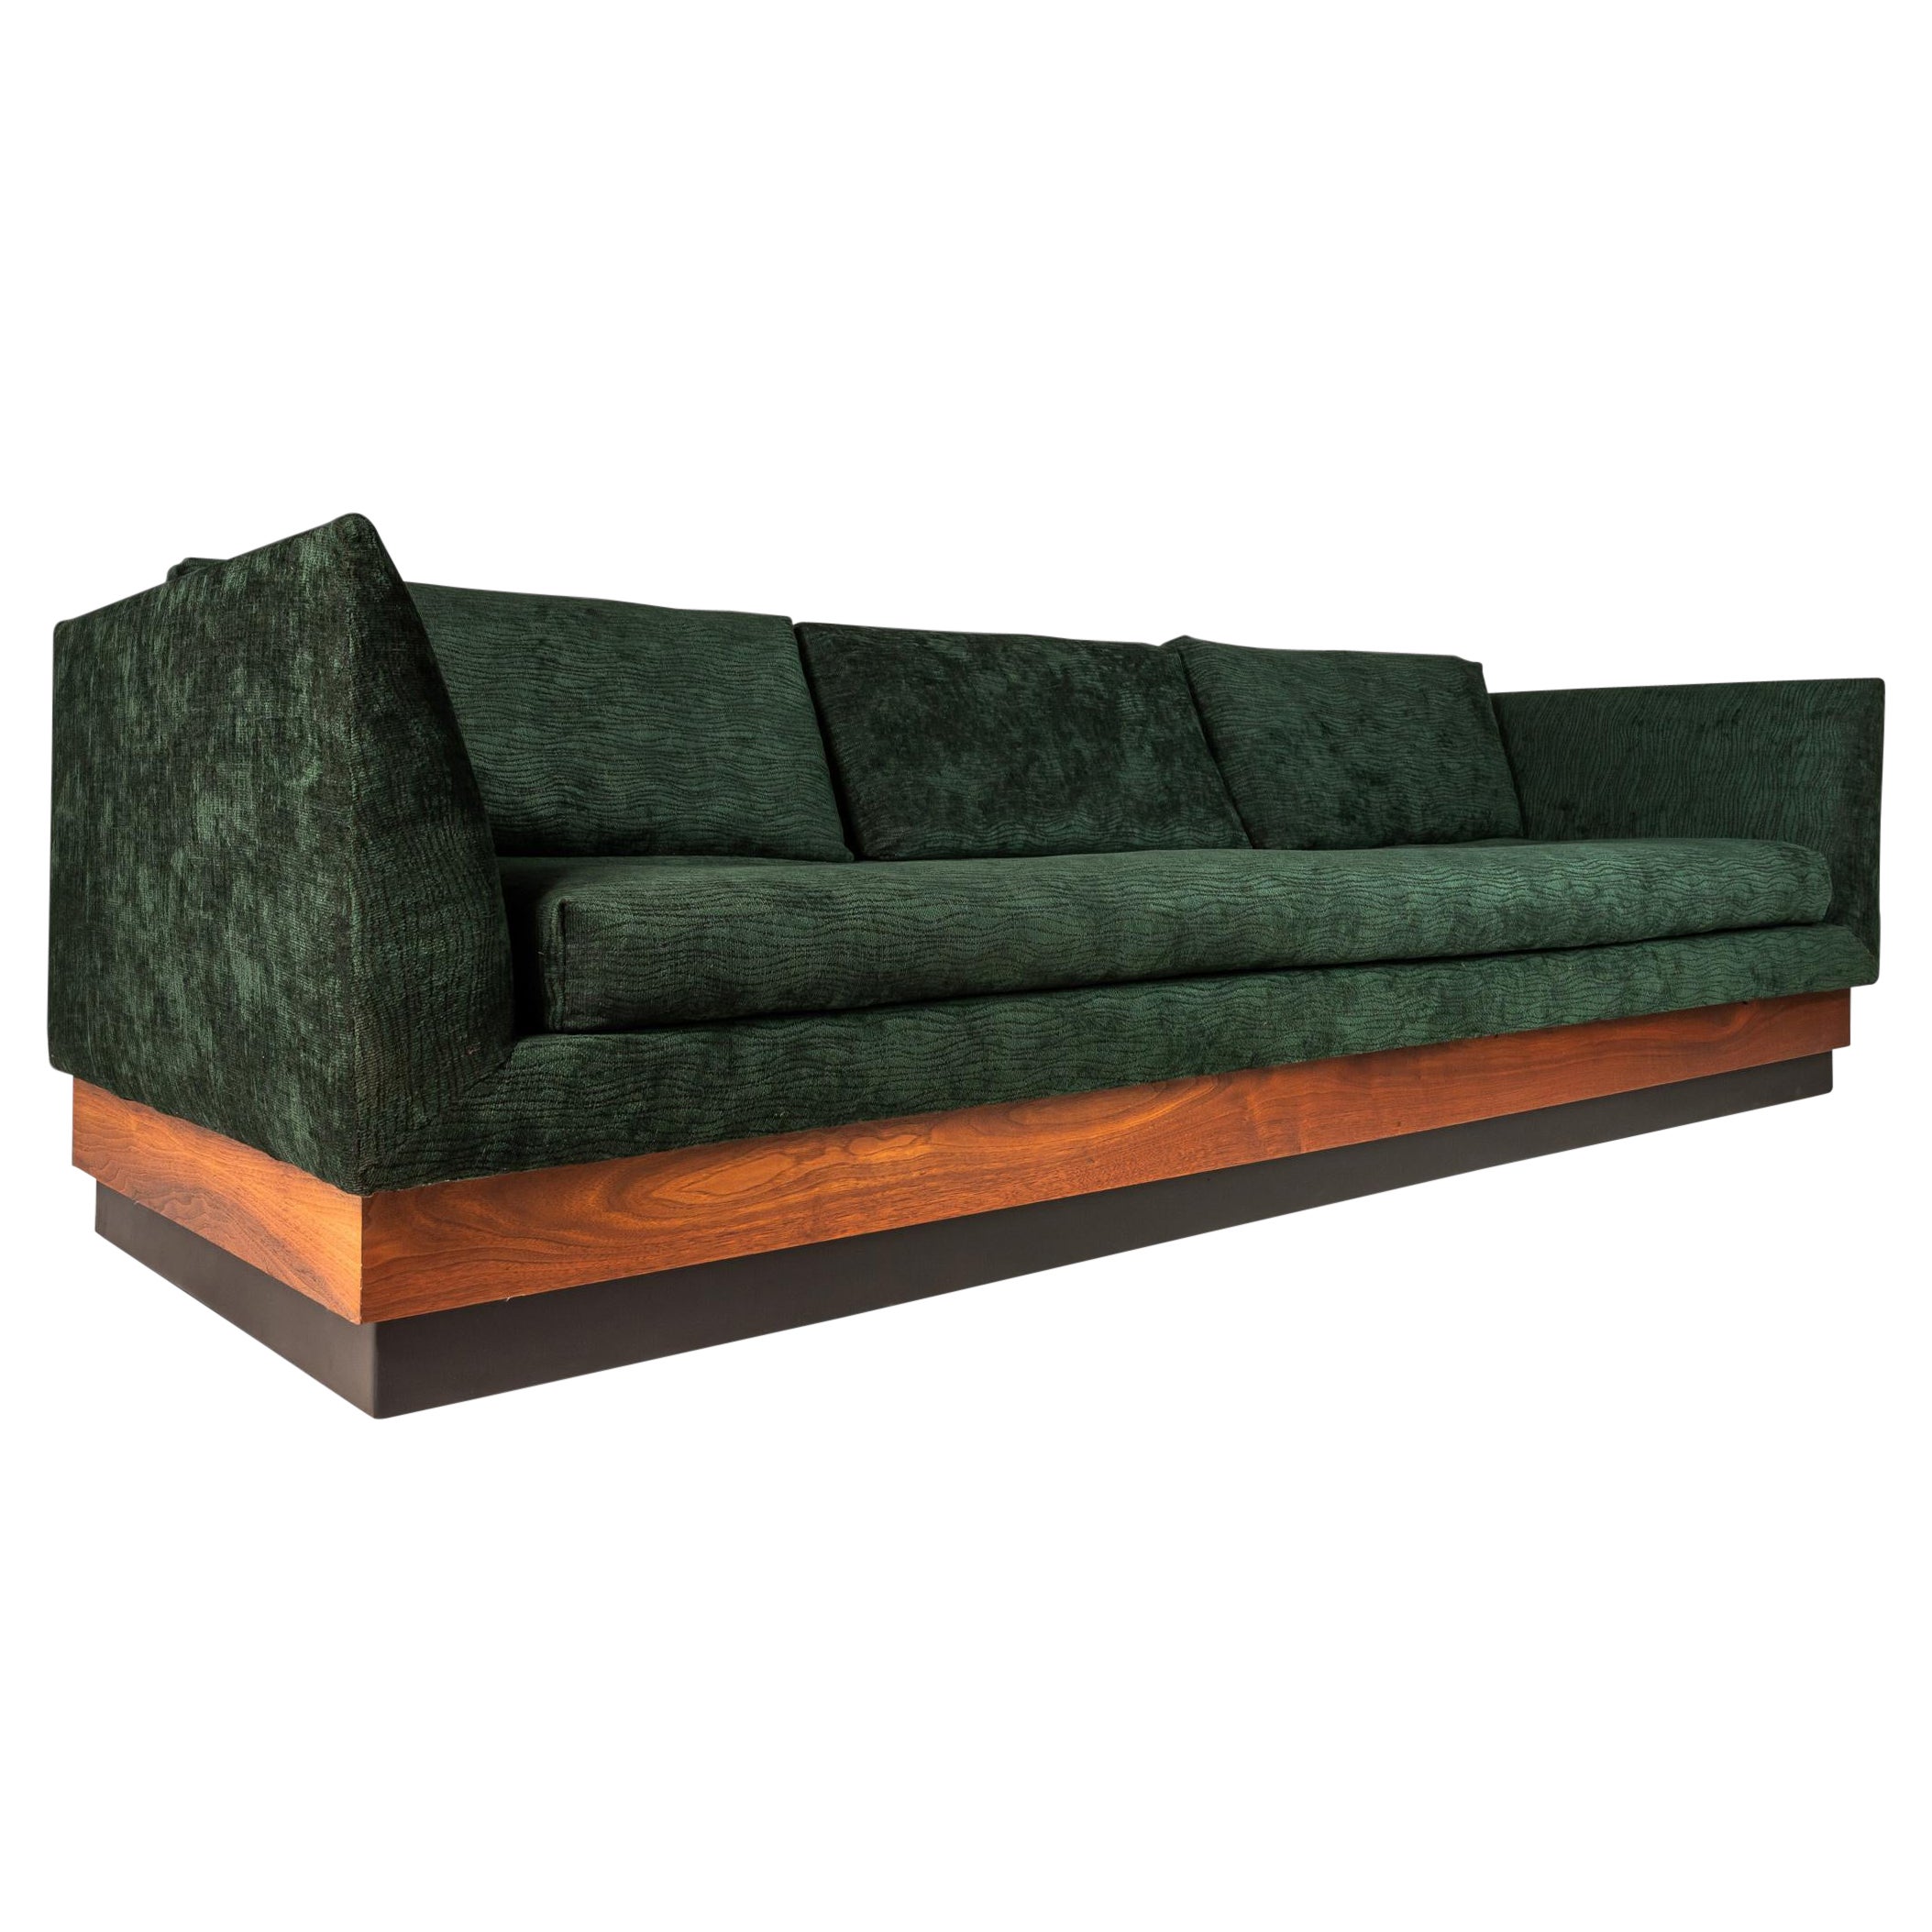 MCM Platform Sofa in Walnut by Adrian Pearsall for Craft Associates, c. 1960's For Sale